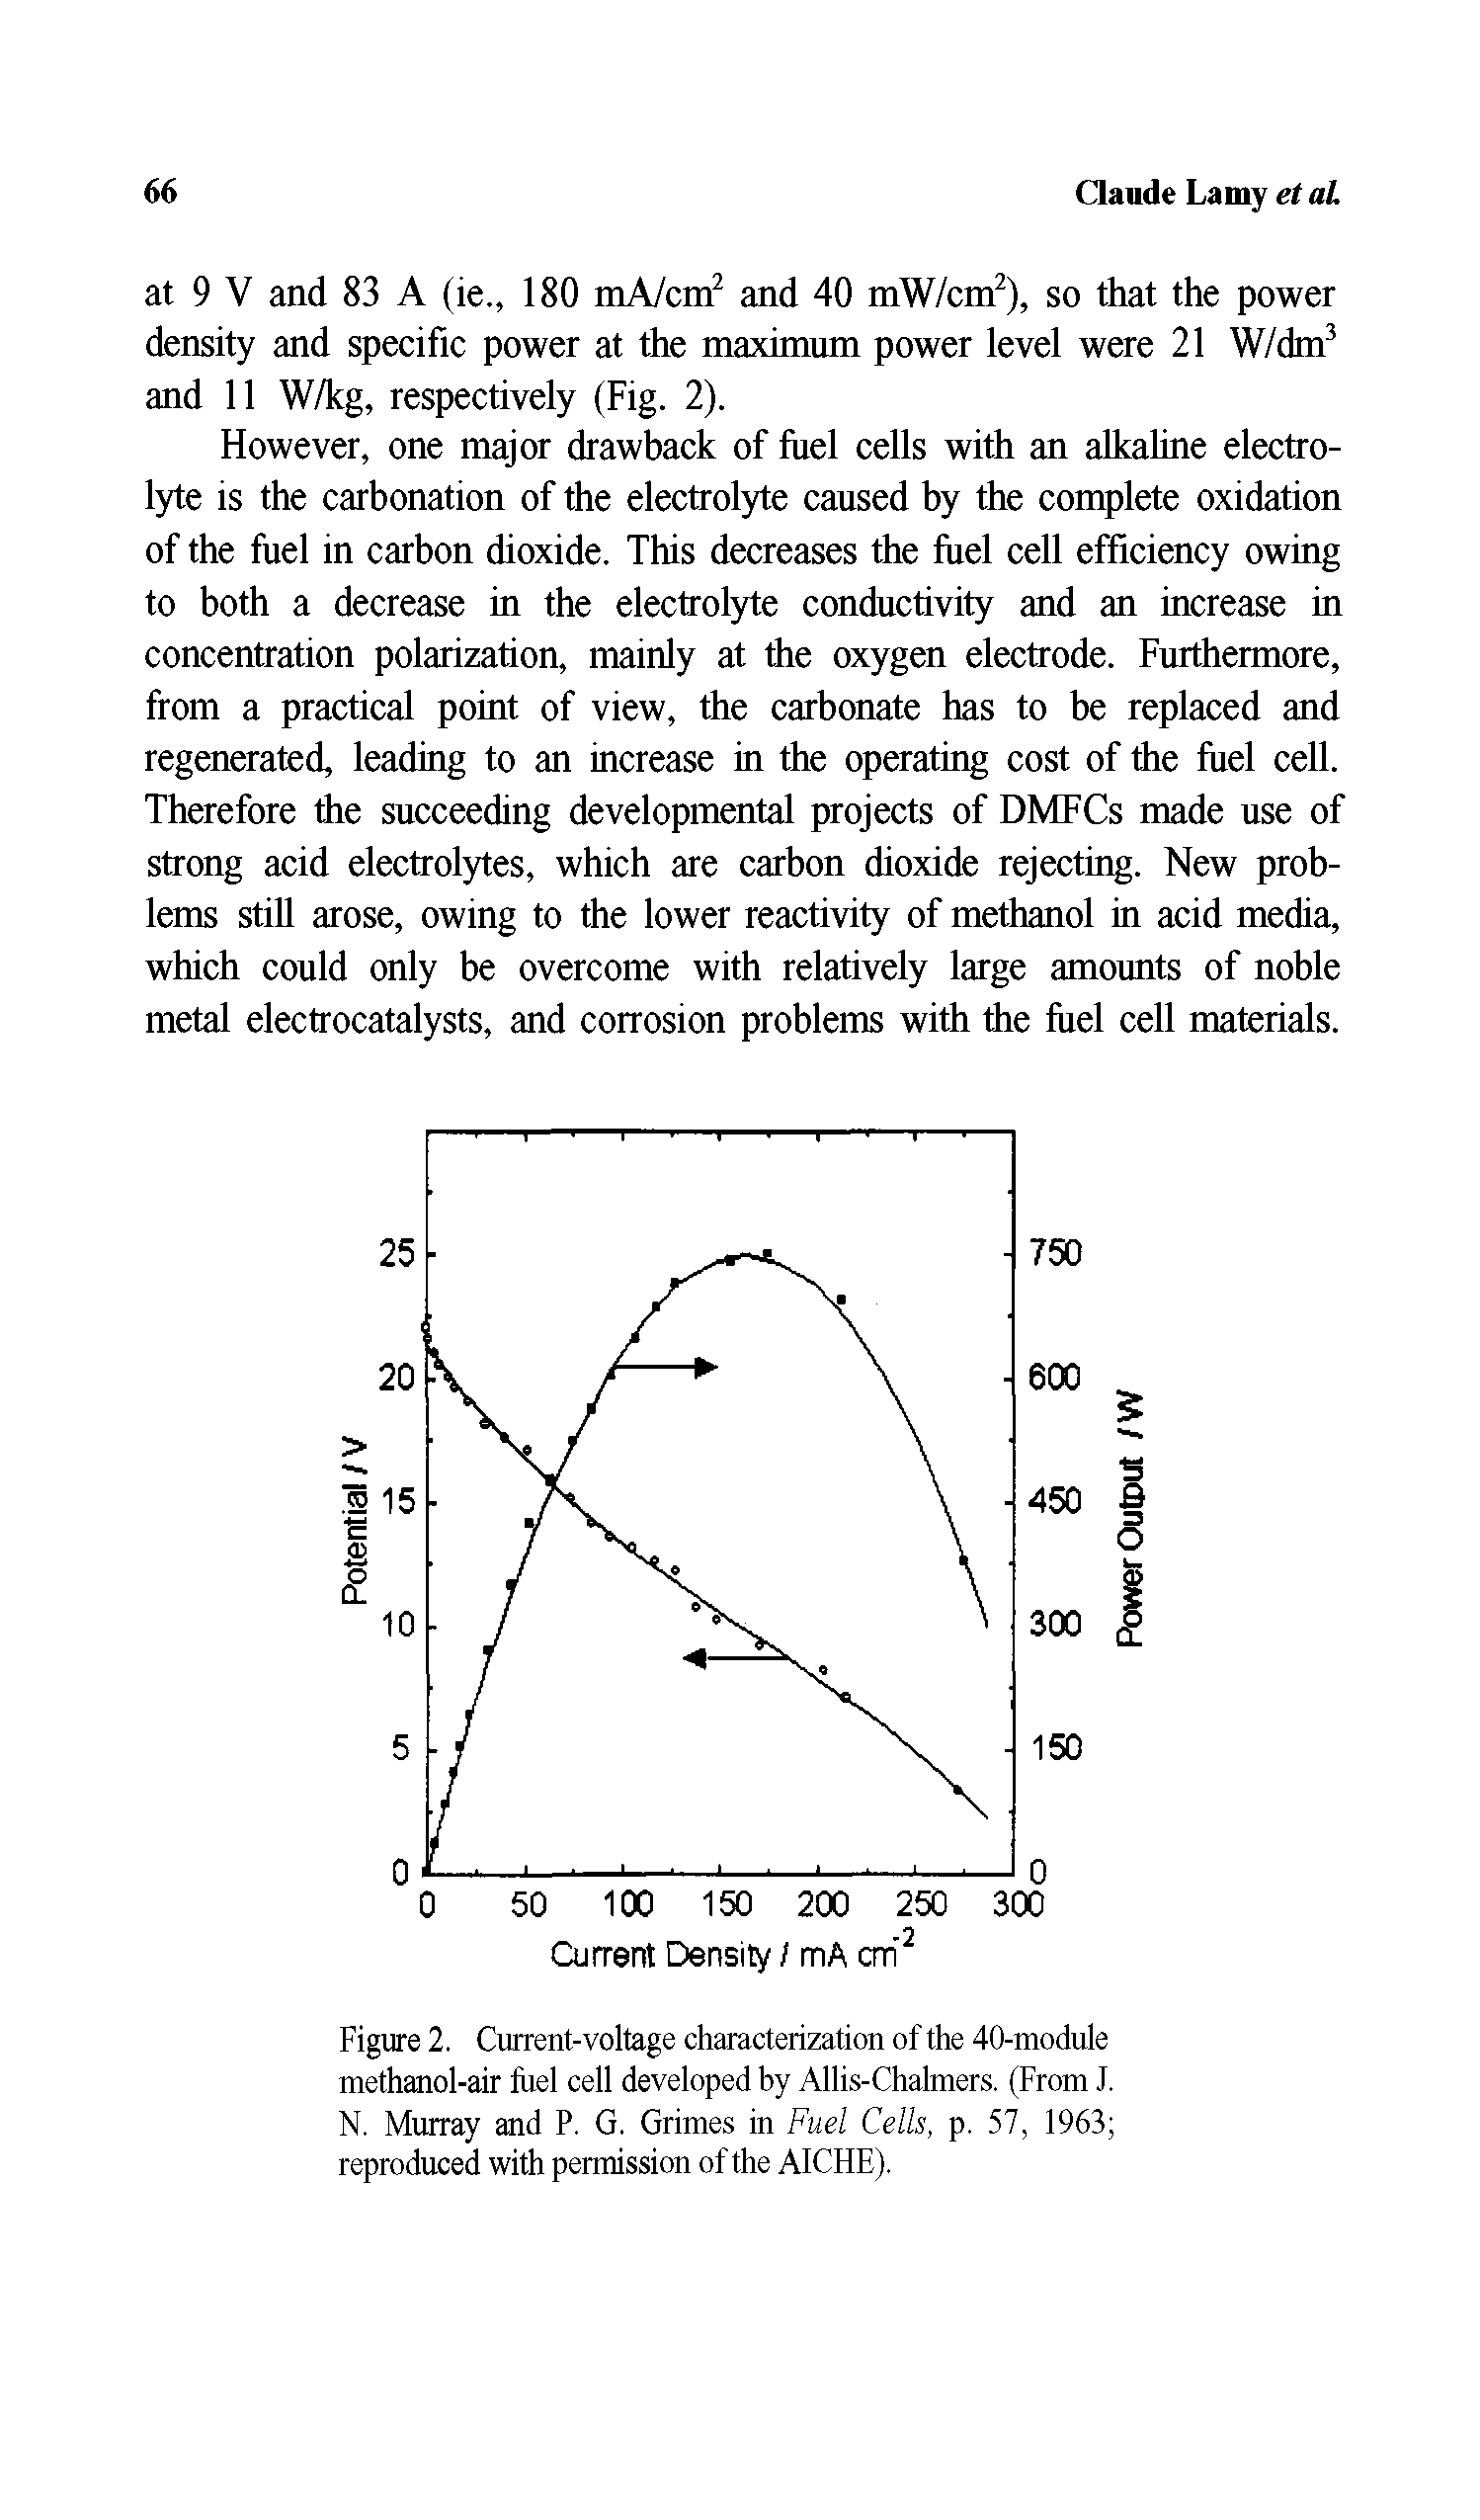 Figure 2. Current-voltage characterization of the 40-module methanol-air lliel cell developed by Allis-Chalmers. (From J. N. Murray and P. G. Grimes in Fuel Cells, p. 57, 1963 reproduced with permission of the AICHE).